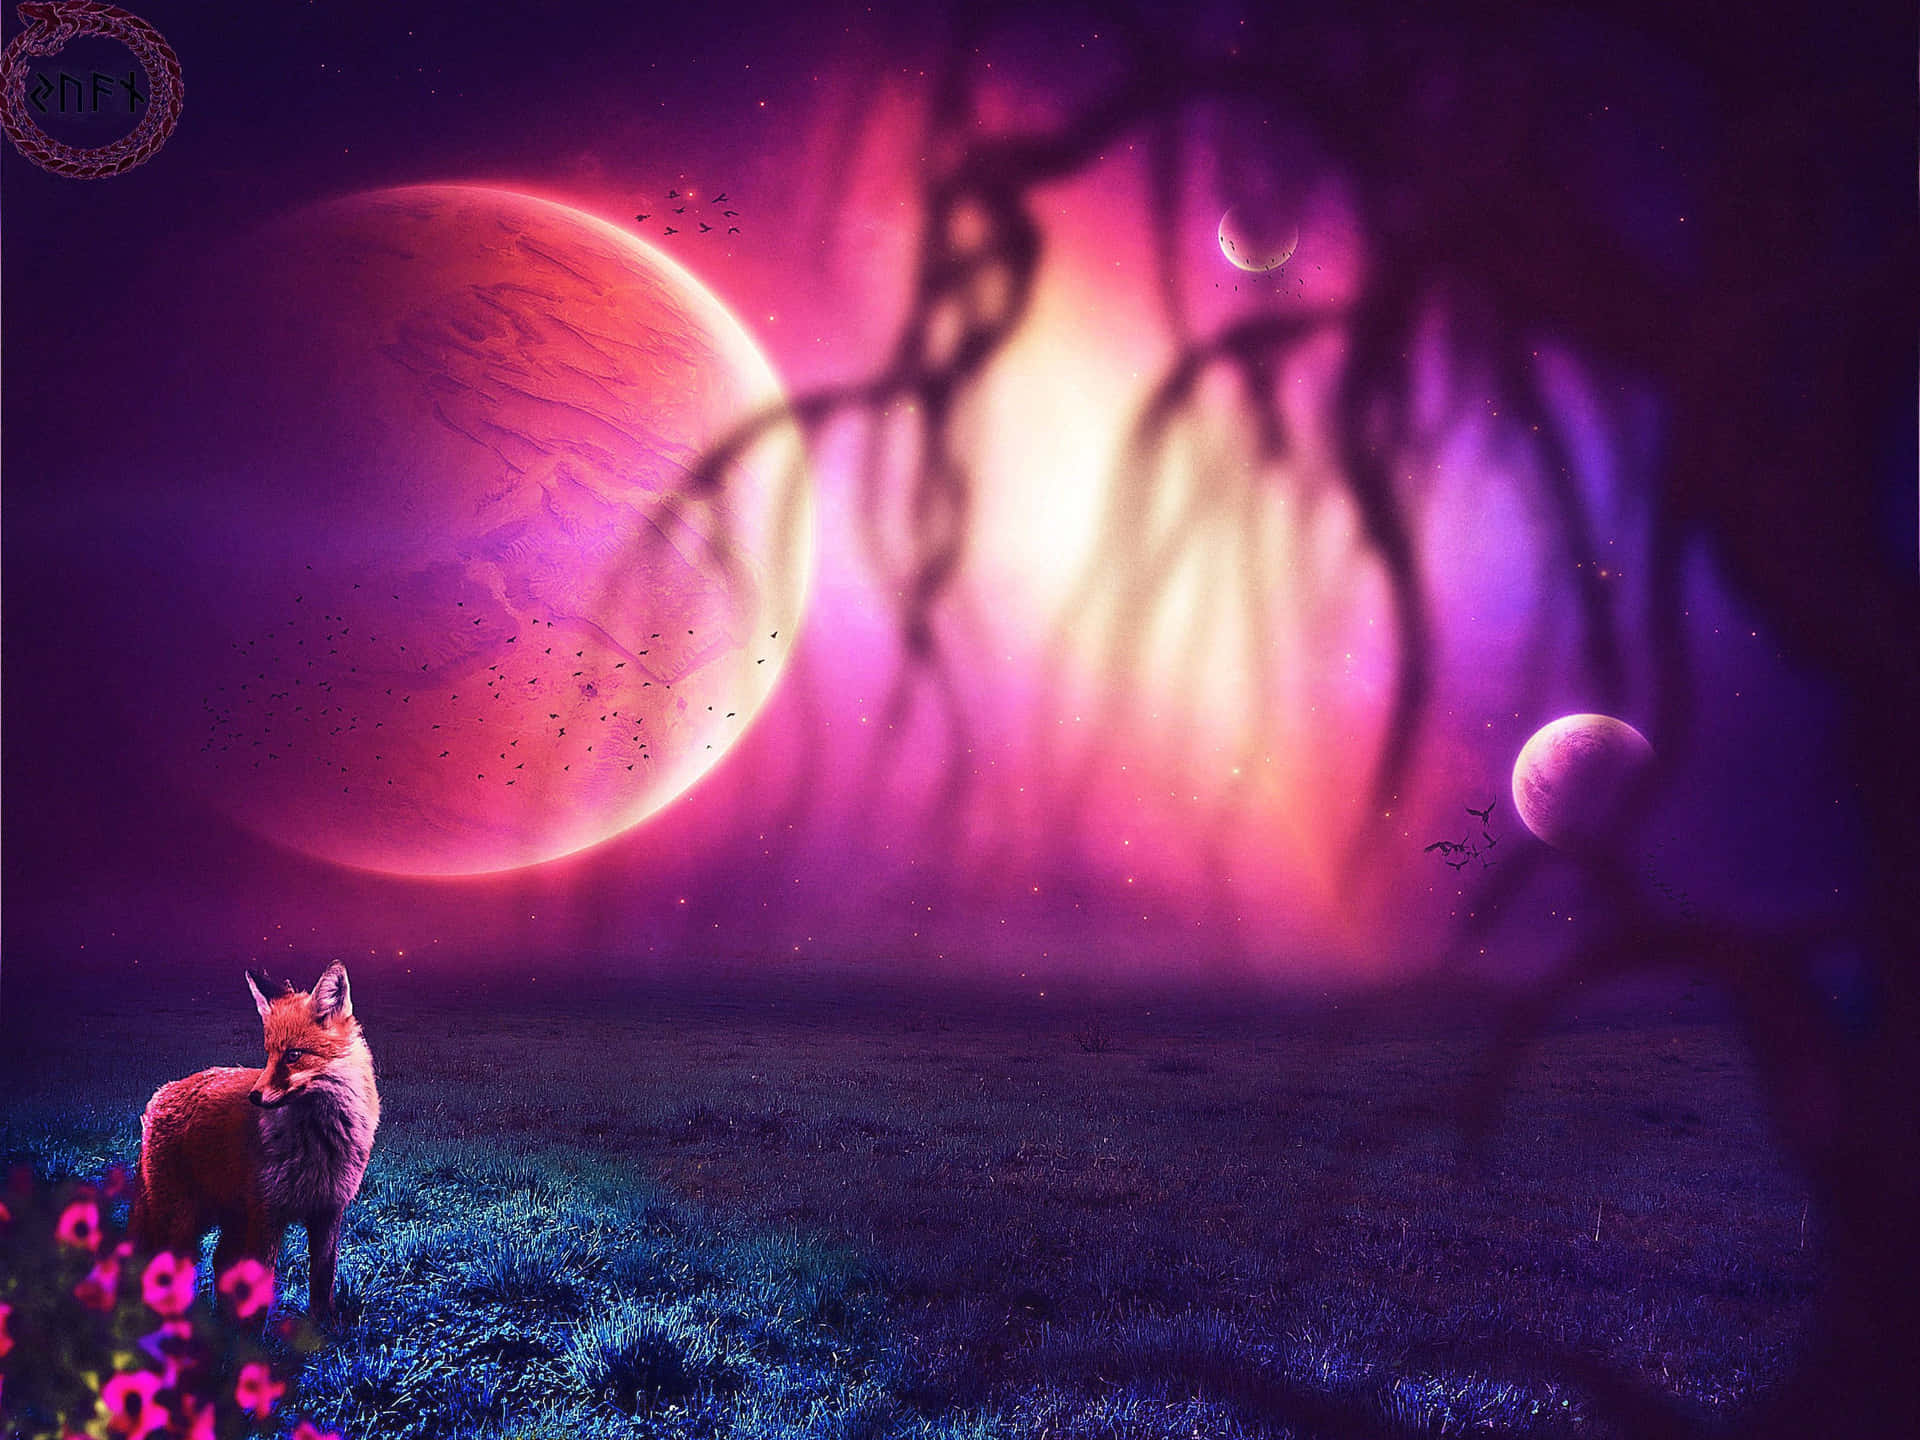 "Let the moonlight guide you home" Wallpaper